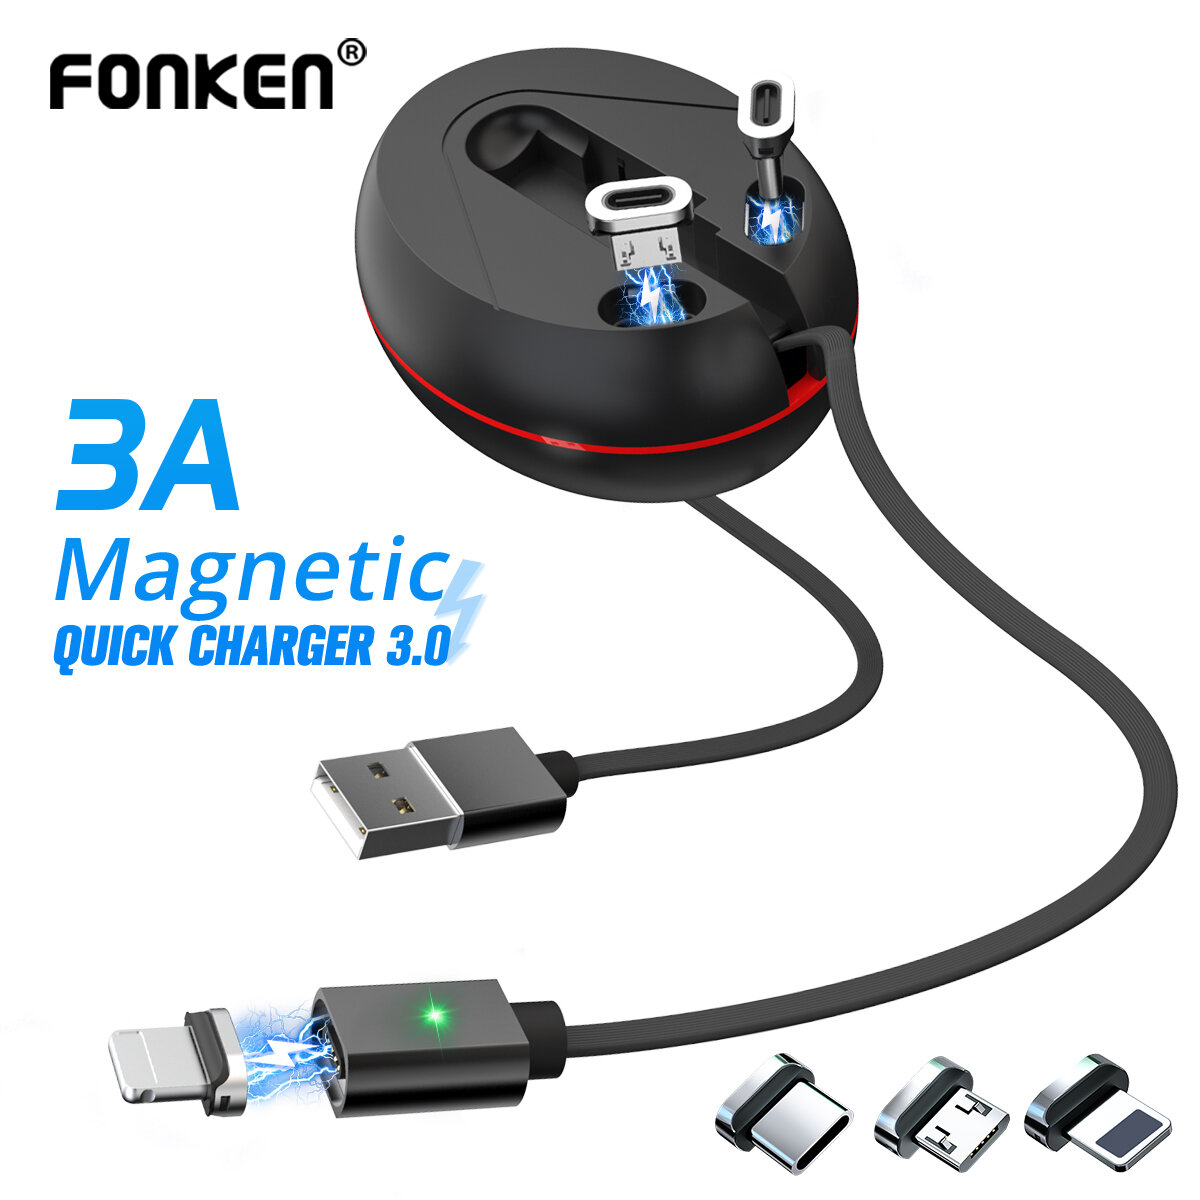 

FONKEN Telescopic Magnetic 3 in 1 USB Type C Micro USB Data Cable for Samsung Galaxy S20 Ultra Huawei P40 OnePlus 8 ASUS